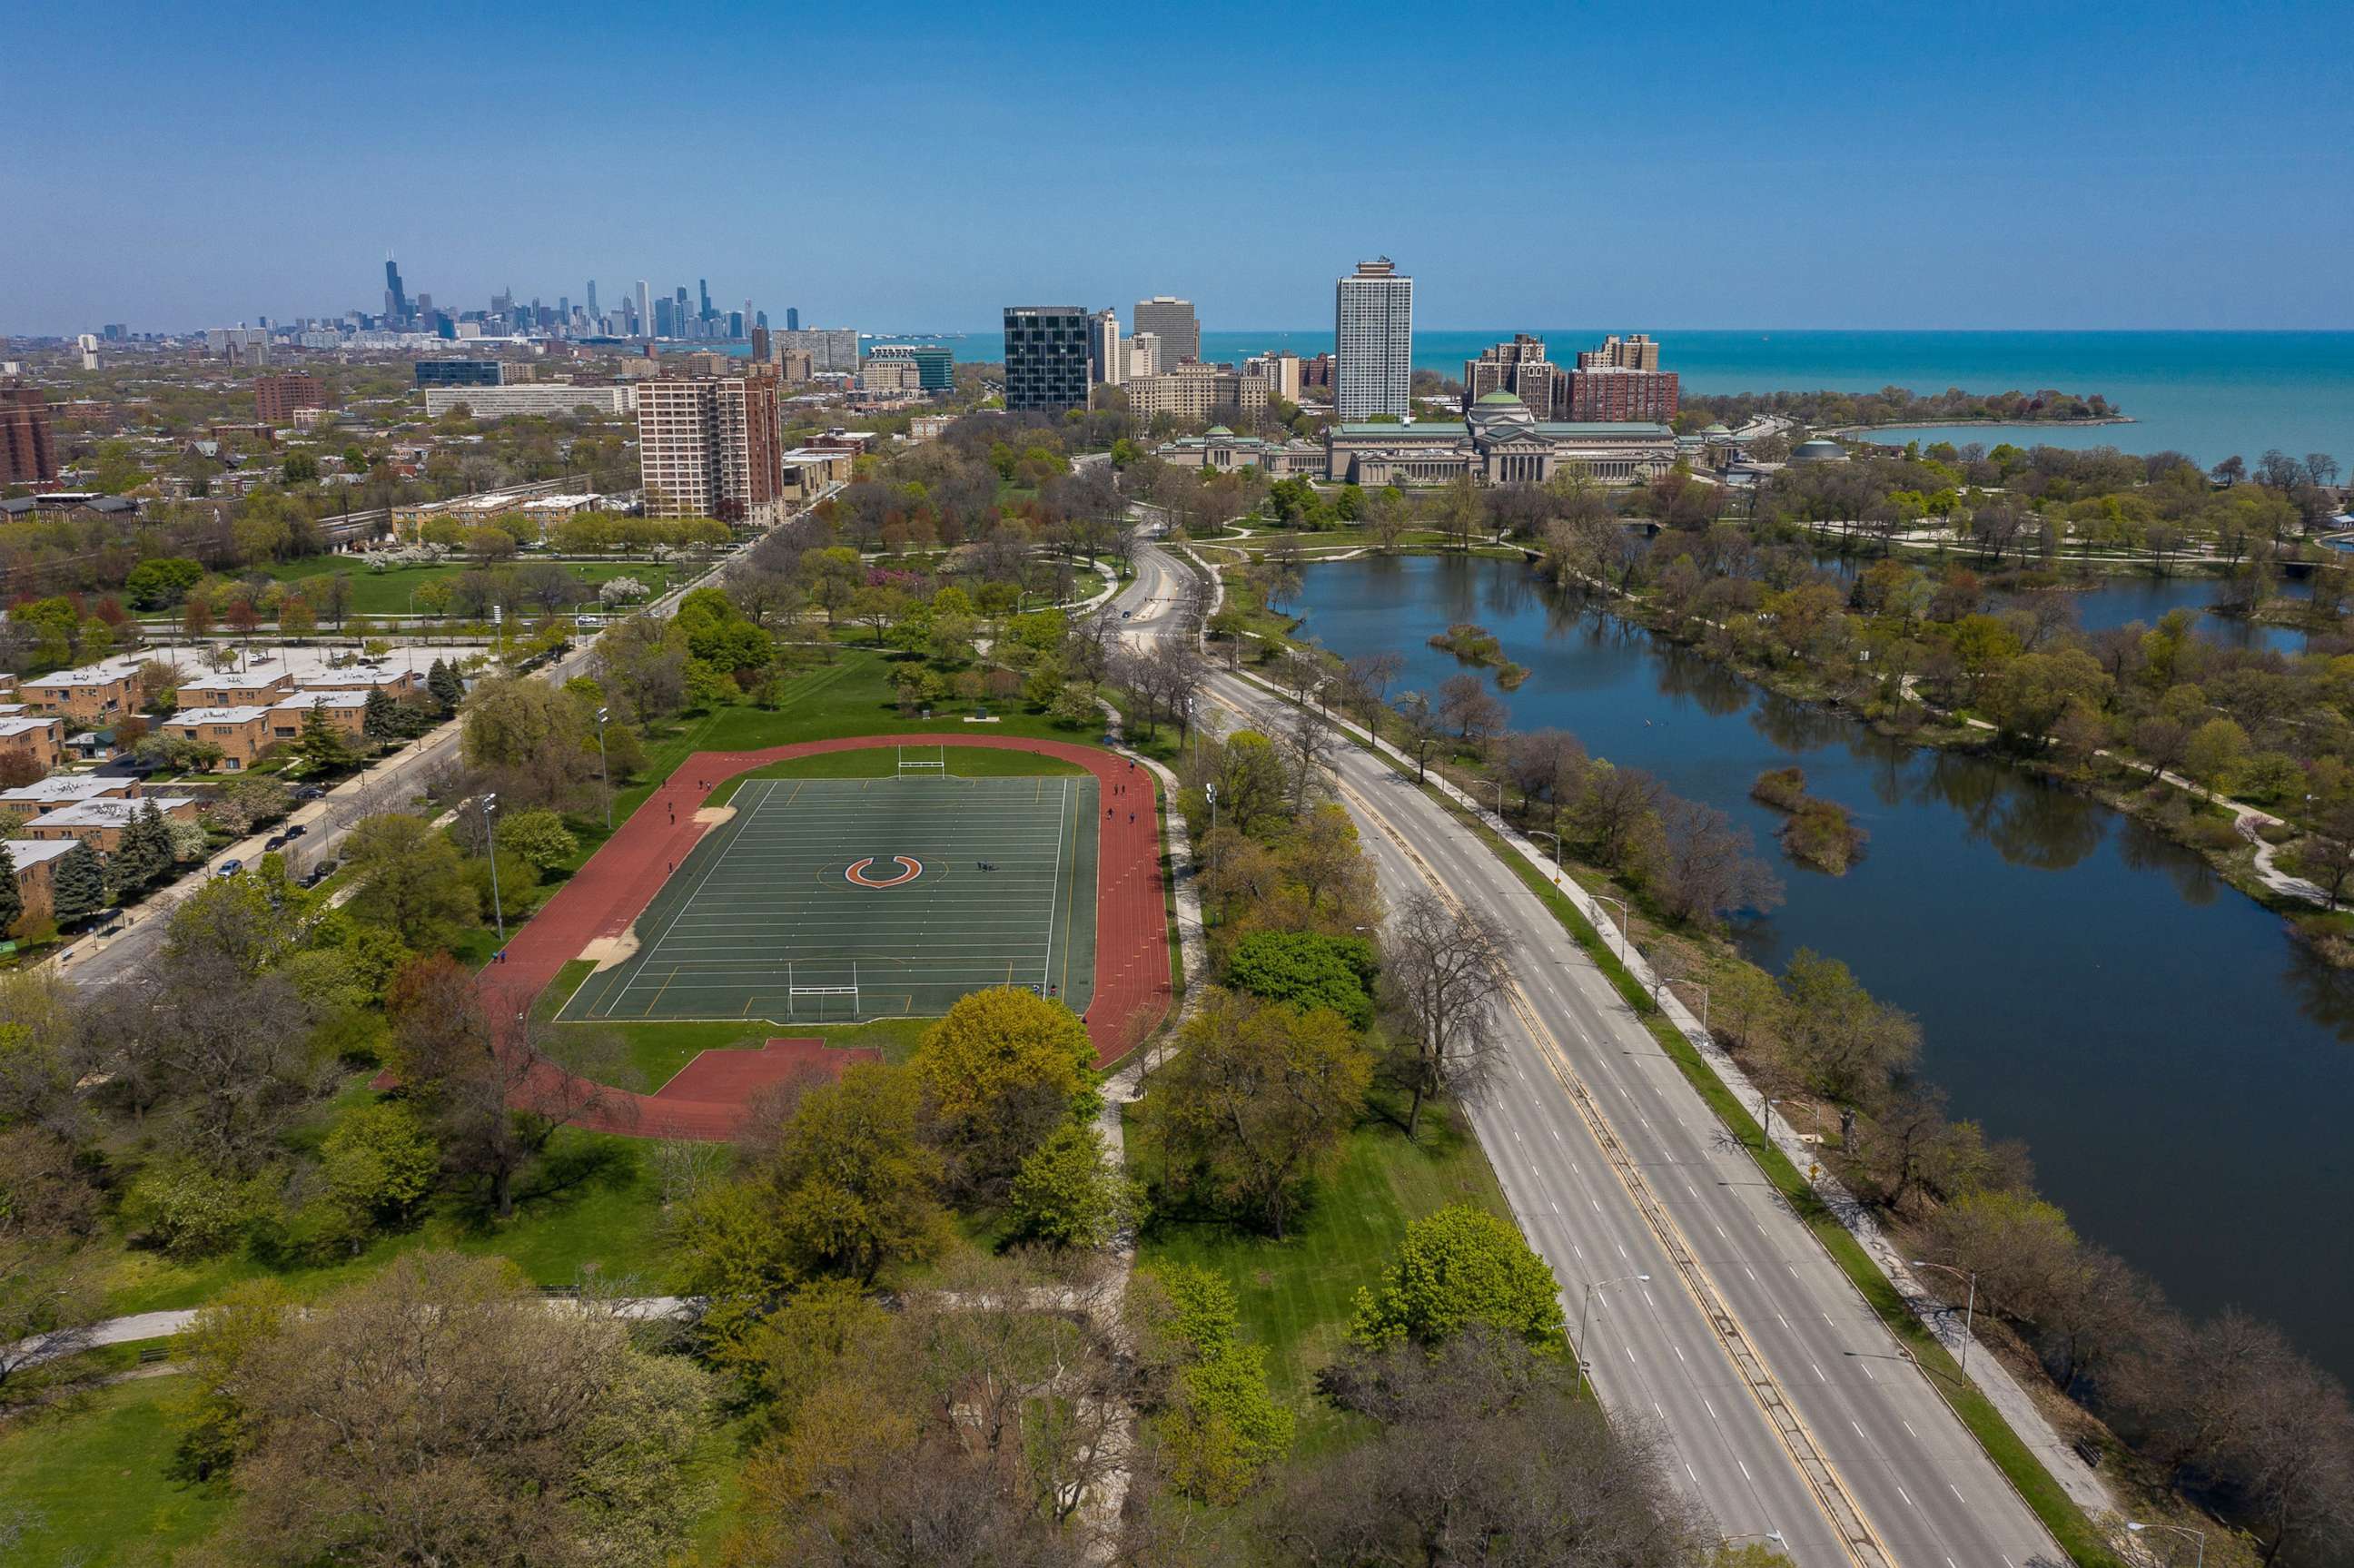 PHOTO: In this May 13, 2020, file photo, an aerial view shows the proposed site for the Obama Presidential Center in Chicago's Jackson Park.